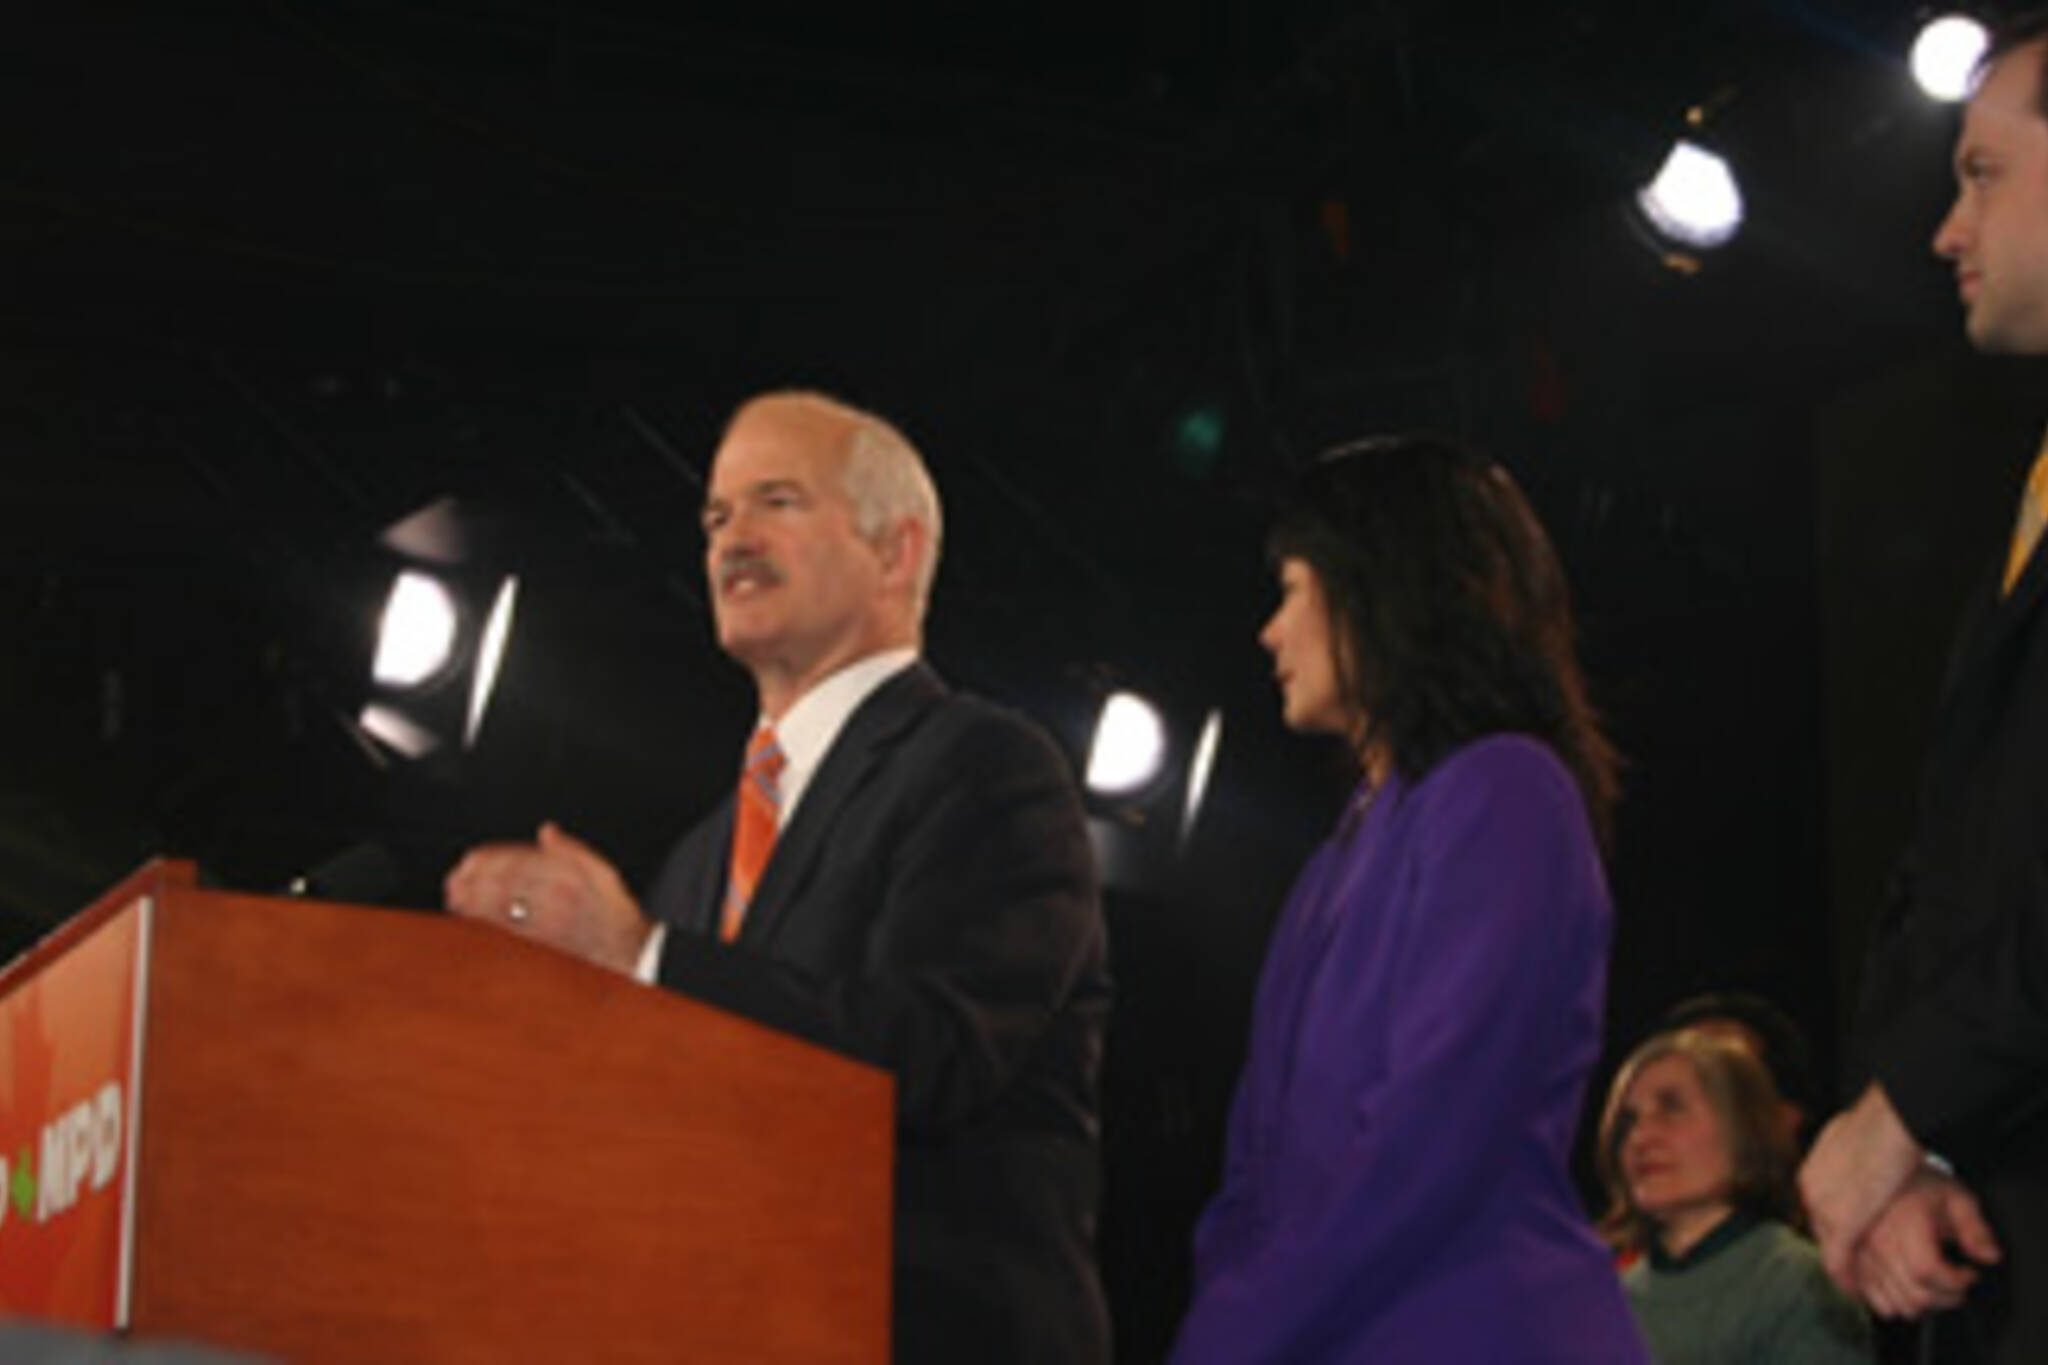 Jack Layton, with wife Olivia Chow and son, tell the crowd what they want to hear